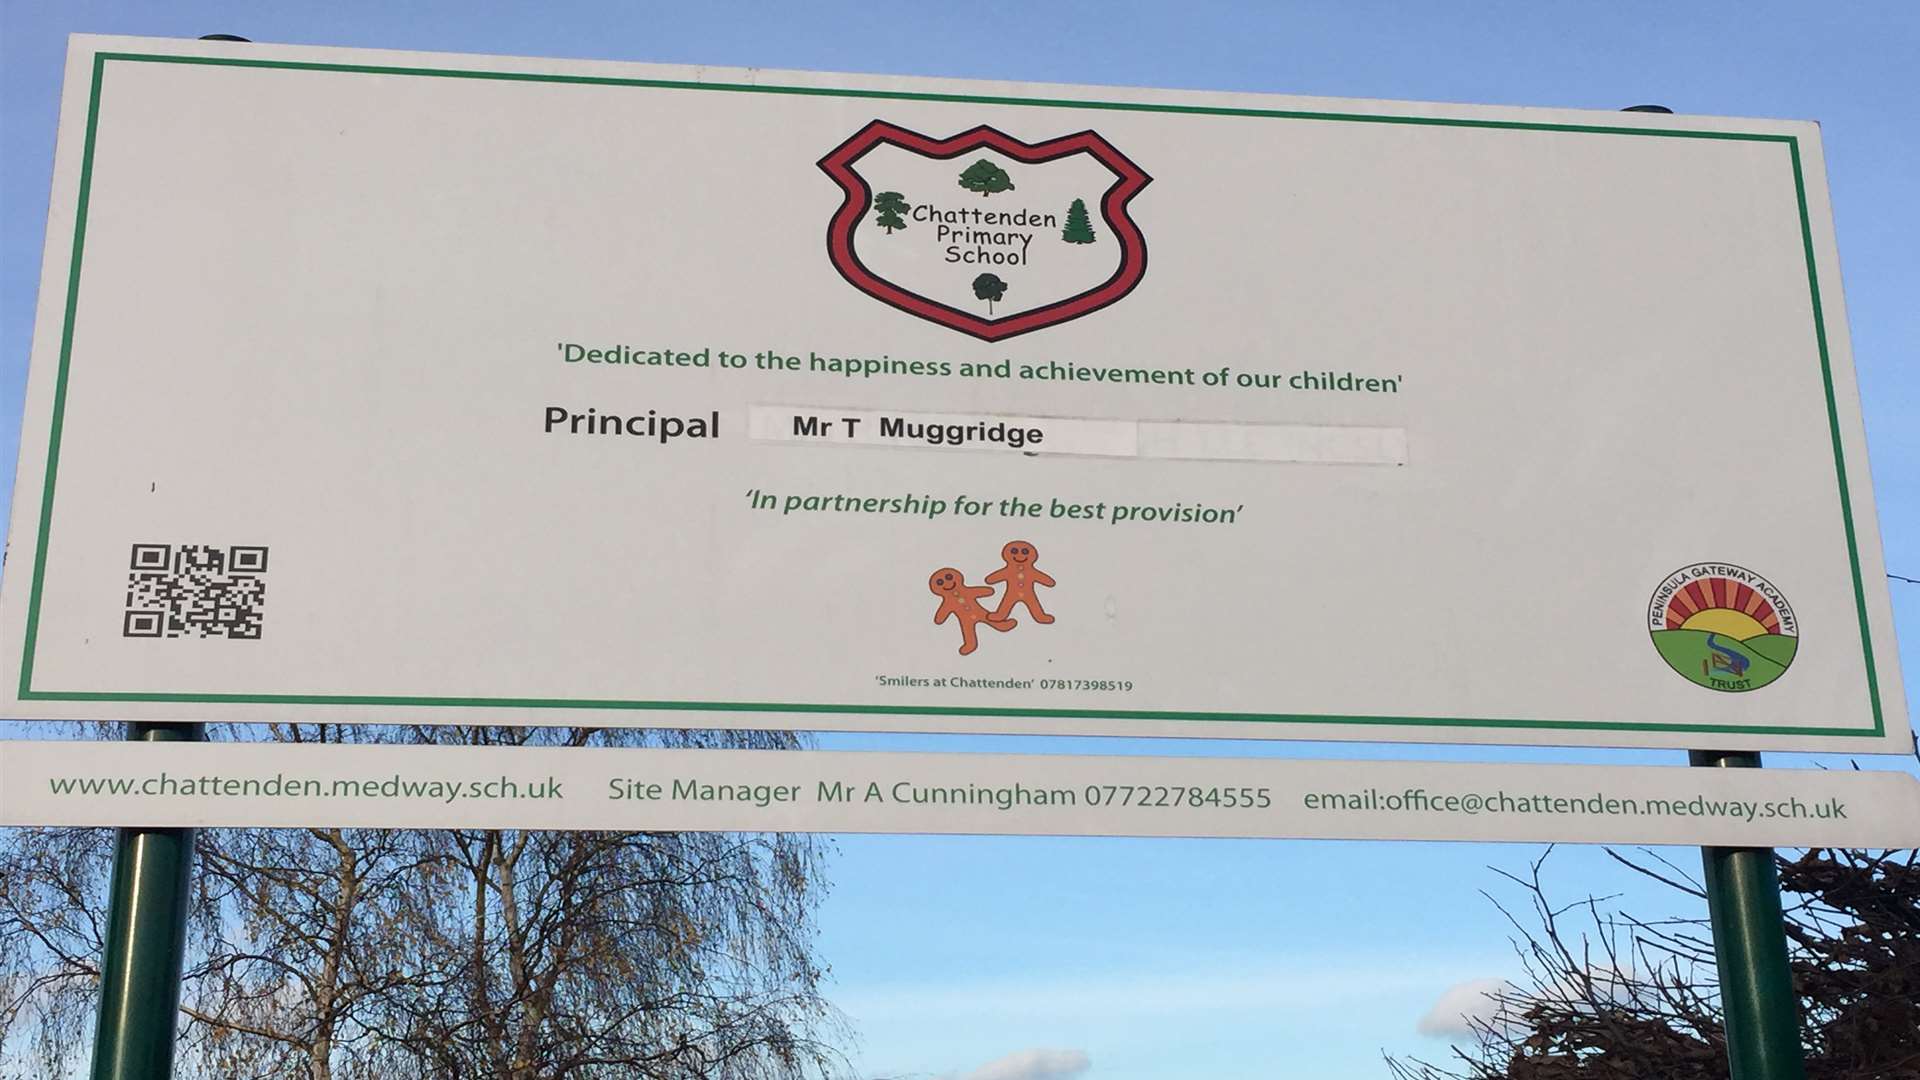 At Chattenden Primary School, 100% of pupils achieved a "good" Level 4.